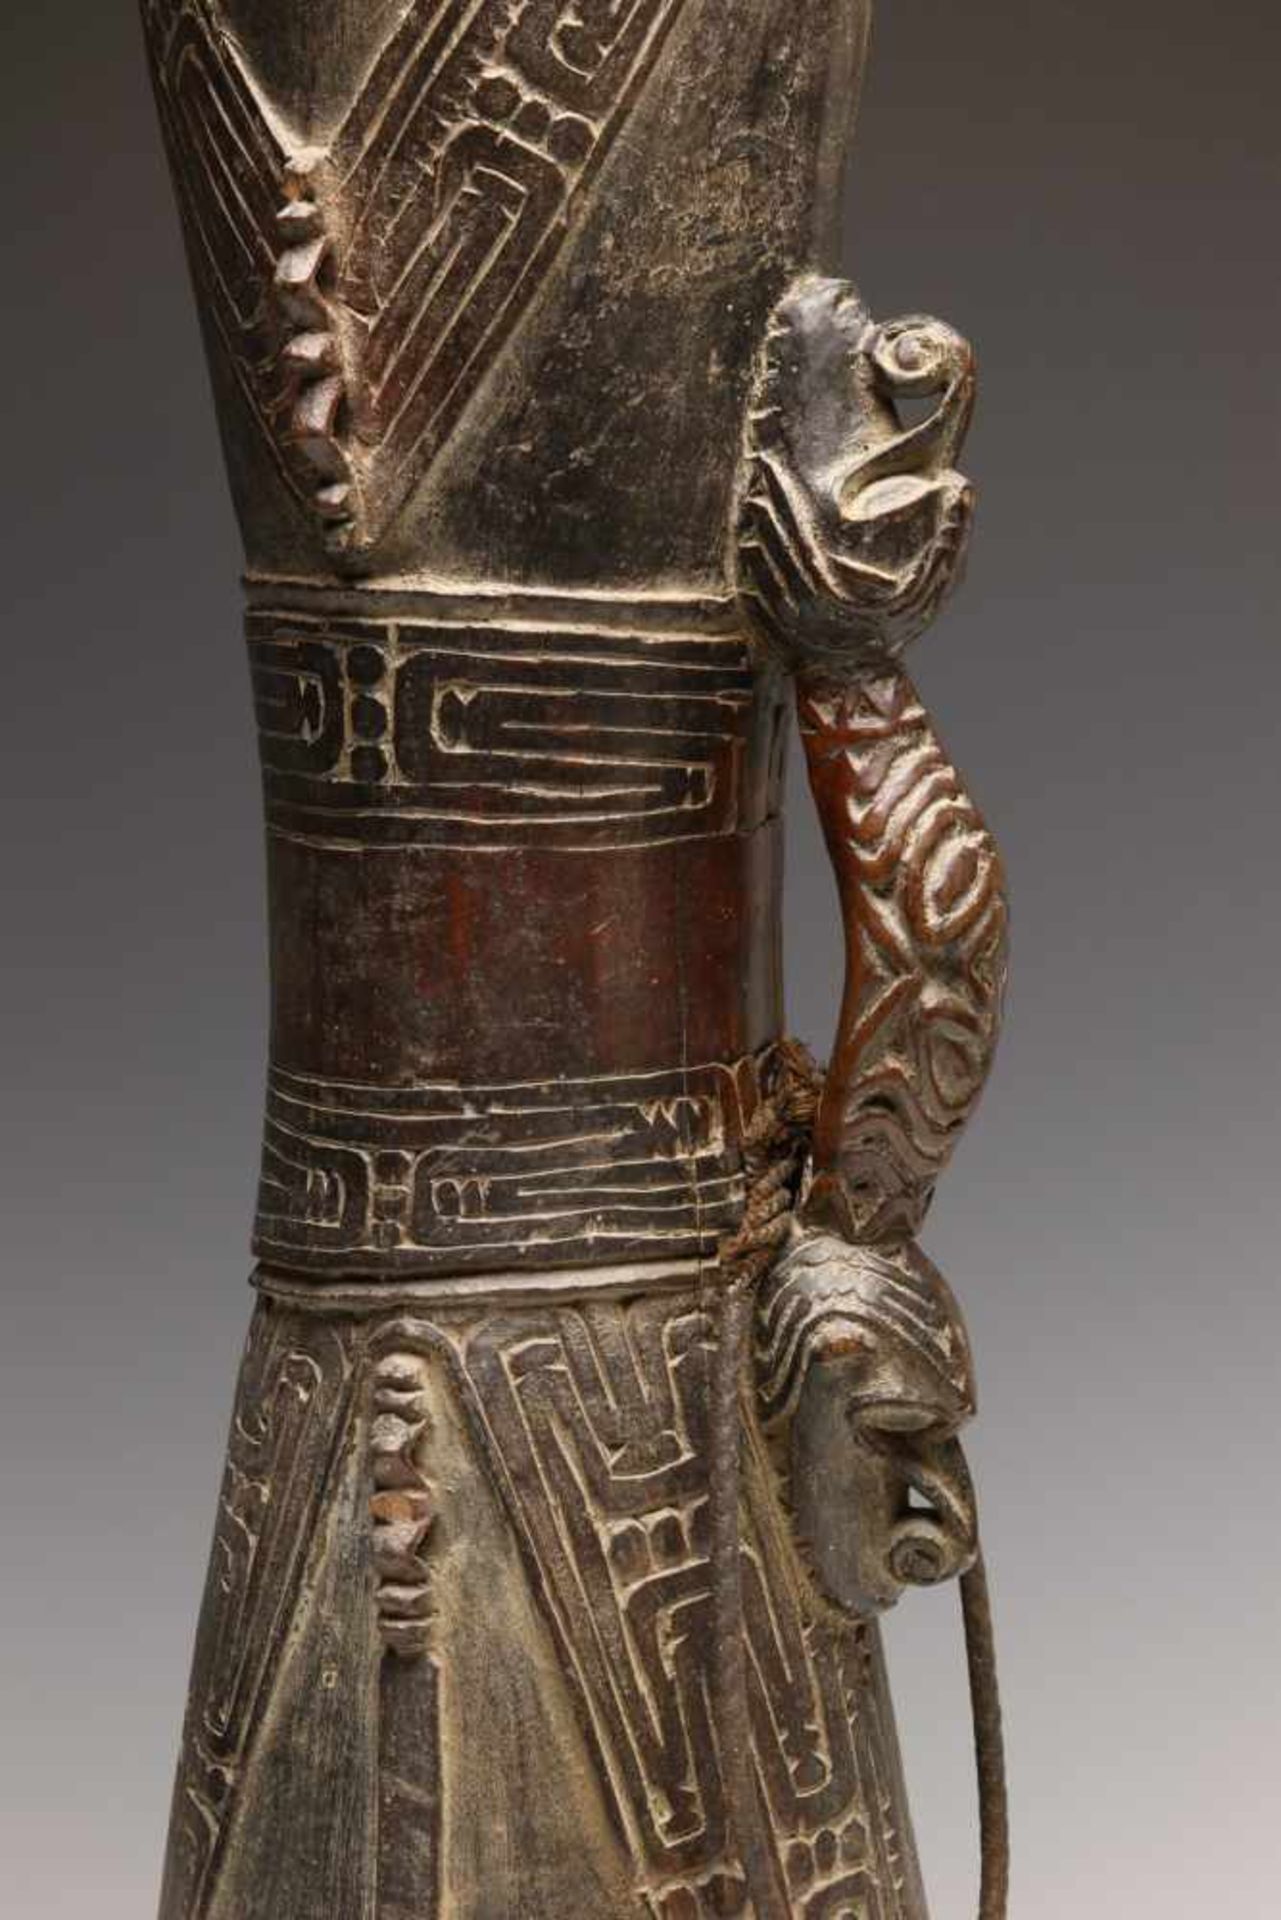 PNG, Lower Sepik, hourglass-shaped drum, the handle on both sides decoratedwith an anthropomorphic